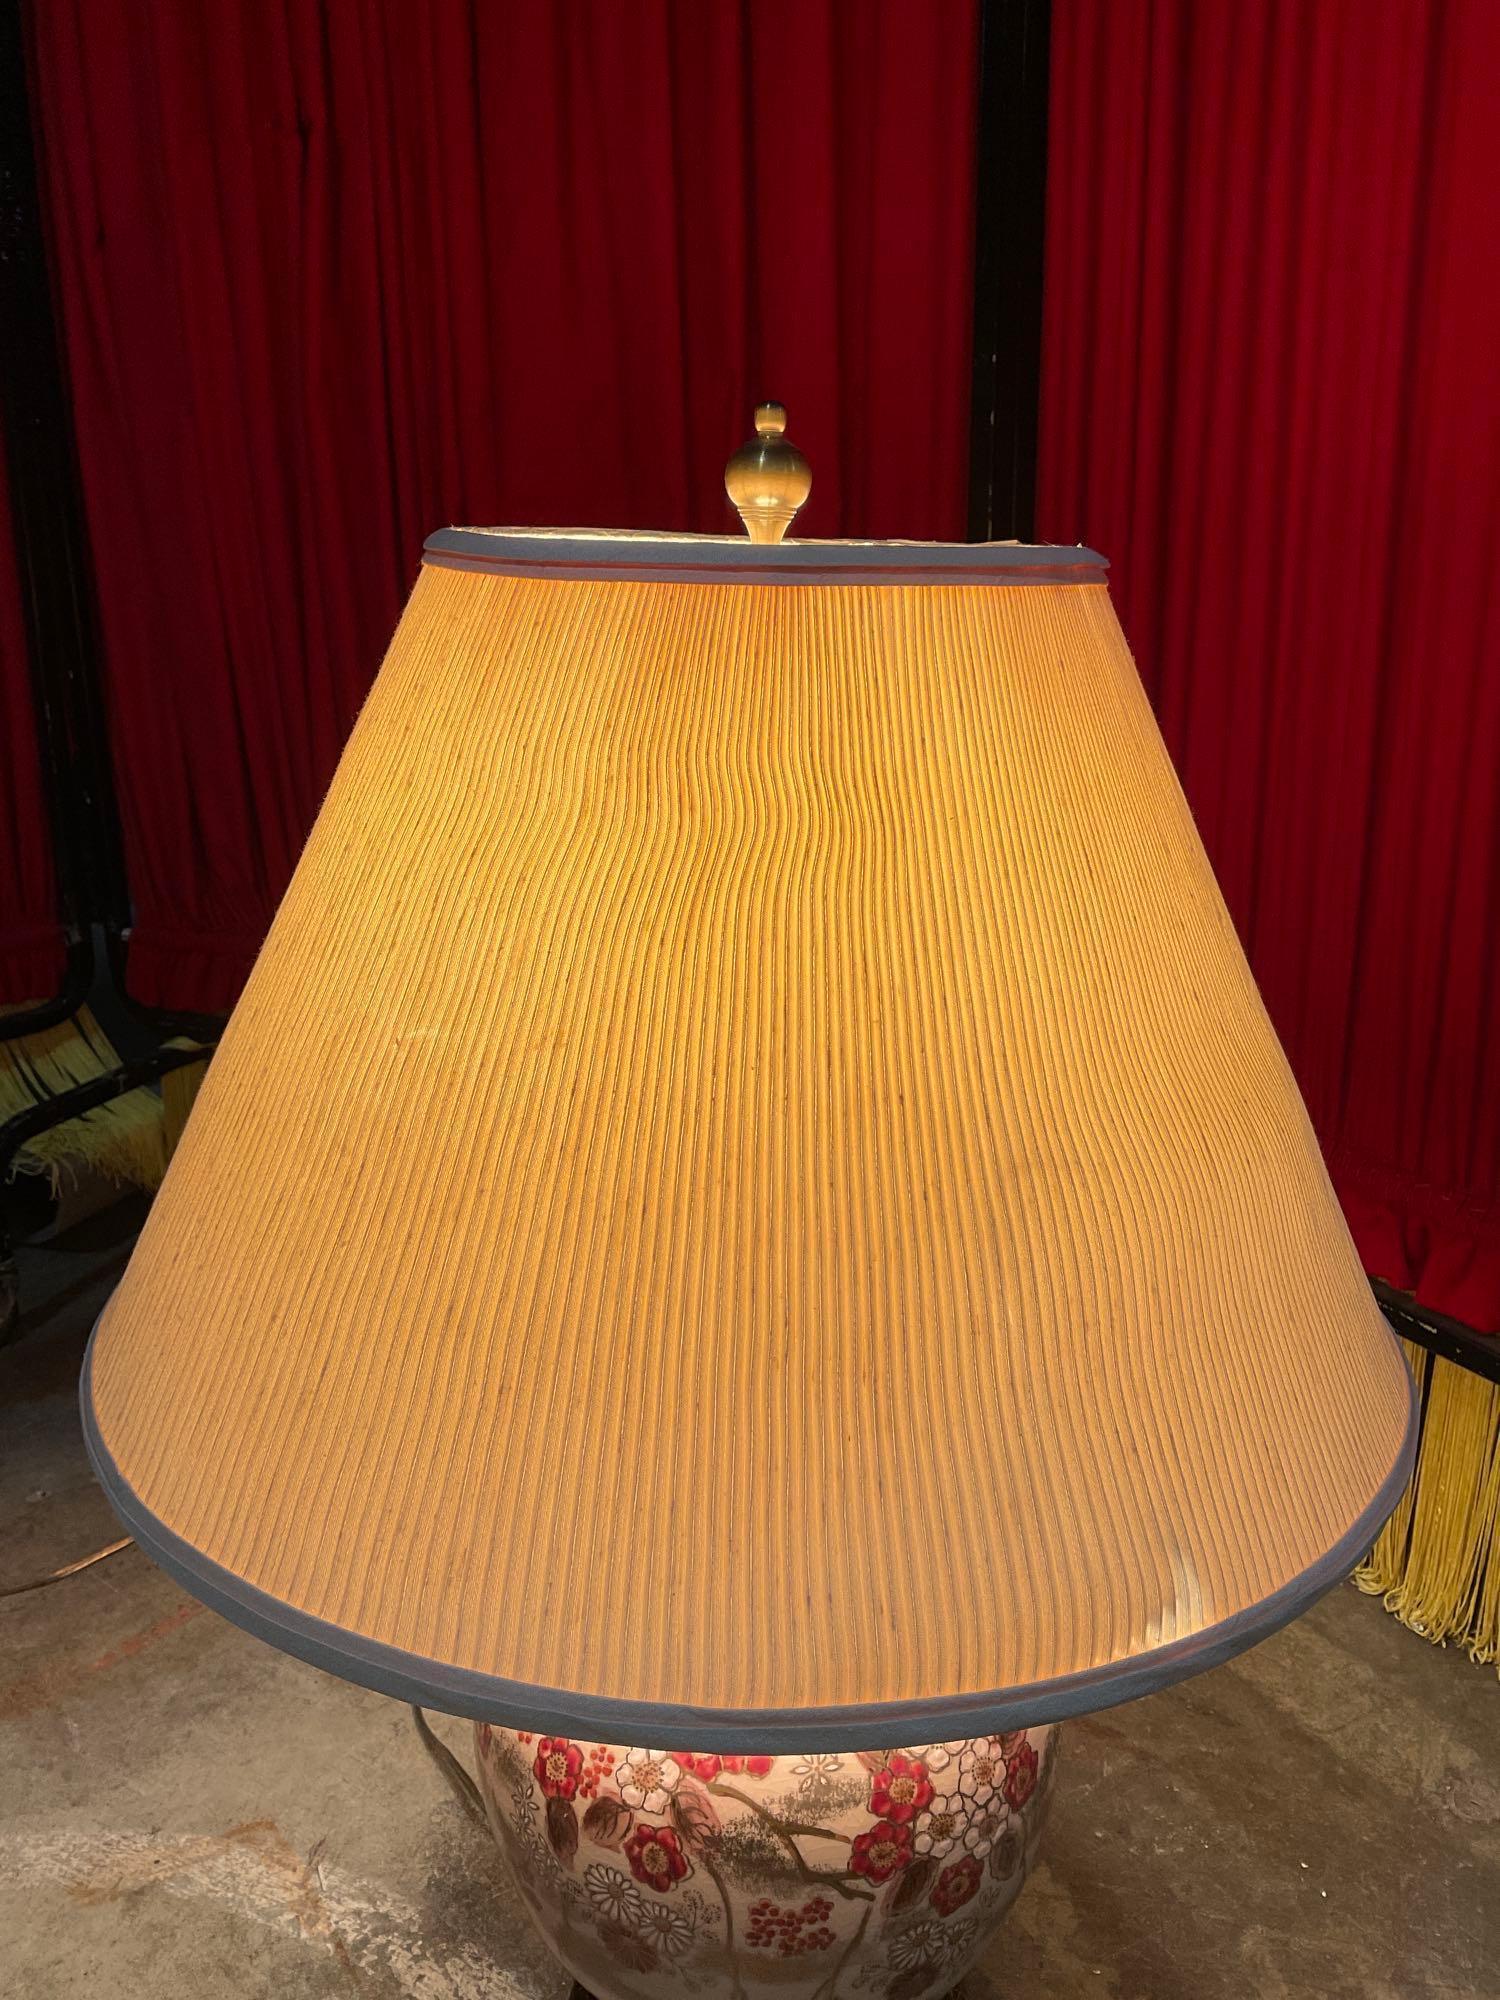 2 Assorted Table Lamps with Shades. See pics.